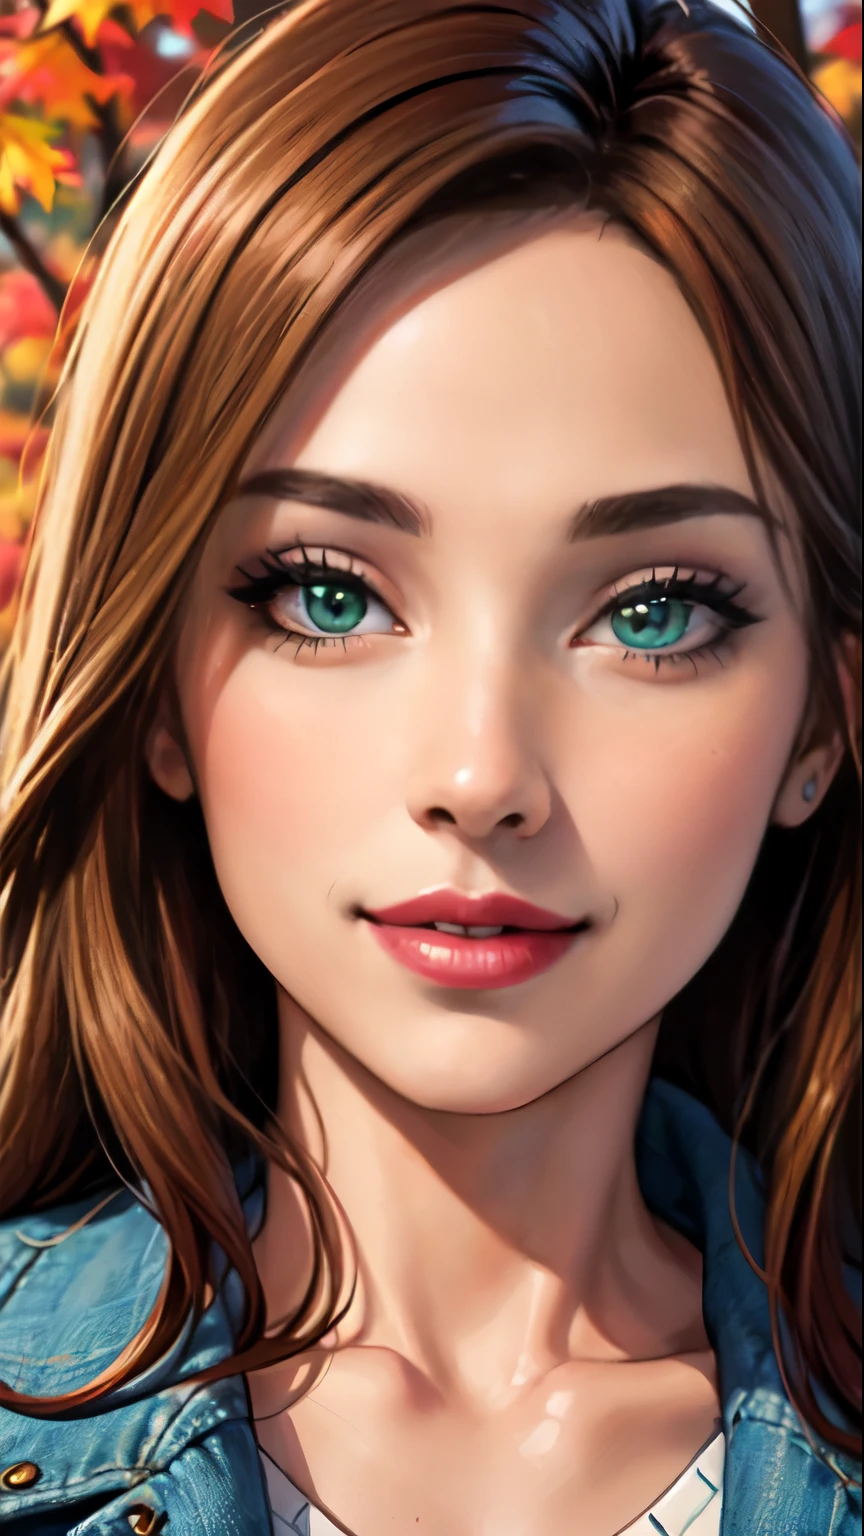 Masterpiece, raw,  beautiful art, professional artist, 8k, art style by sciamano240, very detailed face, very detailed hair, (1girl), caressing each other, perfectly drawn body, beautiful face, long brown hair , very detailed light green eyes , rosey cheeks, intricate details in eyes, sultry smile, looking directly at viewer , happy expression, lipstick, very close up on face, wearing jacket ,sweater, sunny fall setting, 